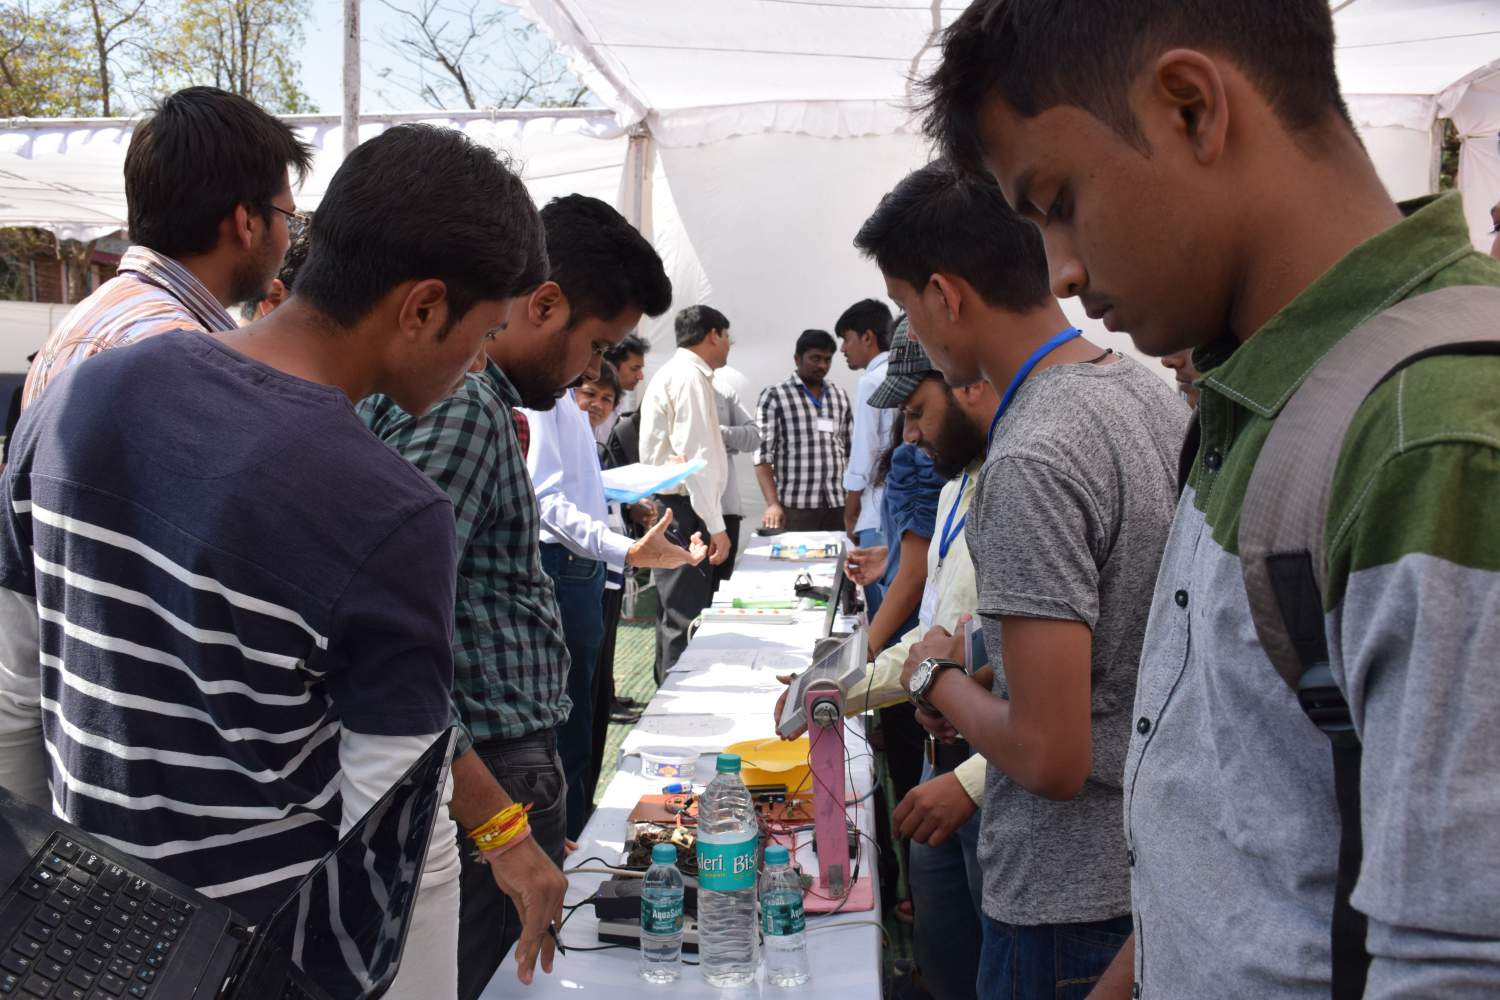 Exhibition by SCEECS Student Club